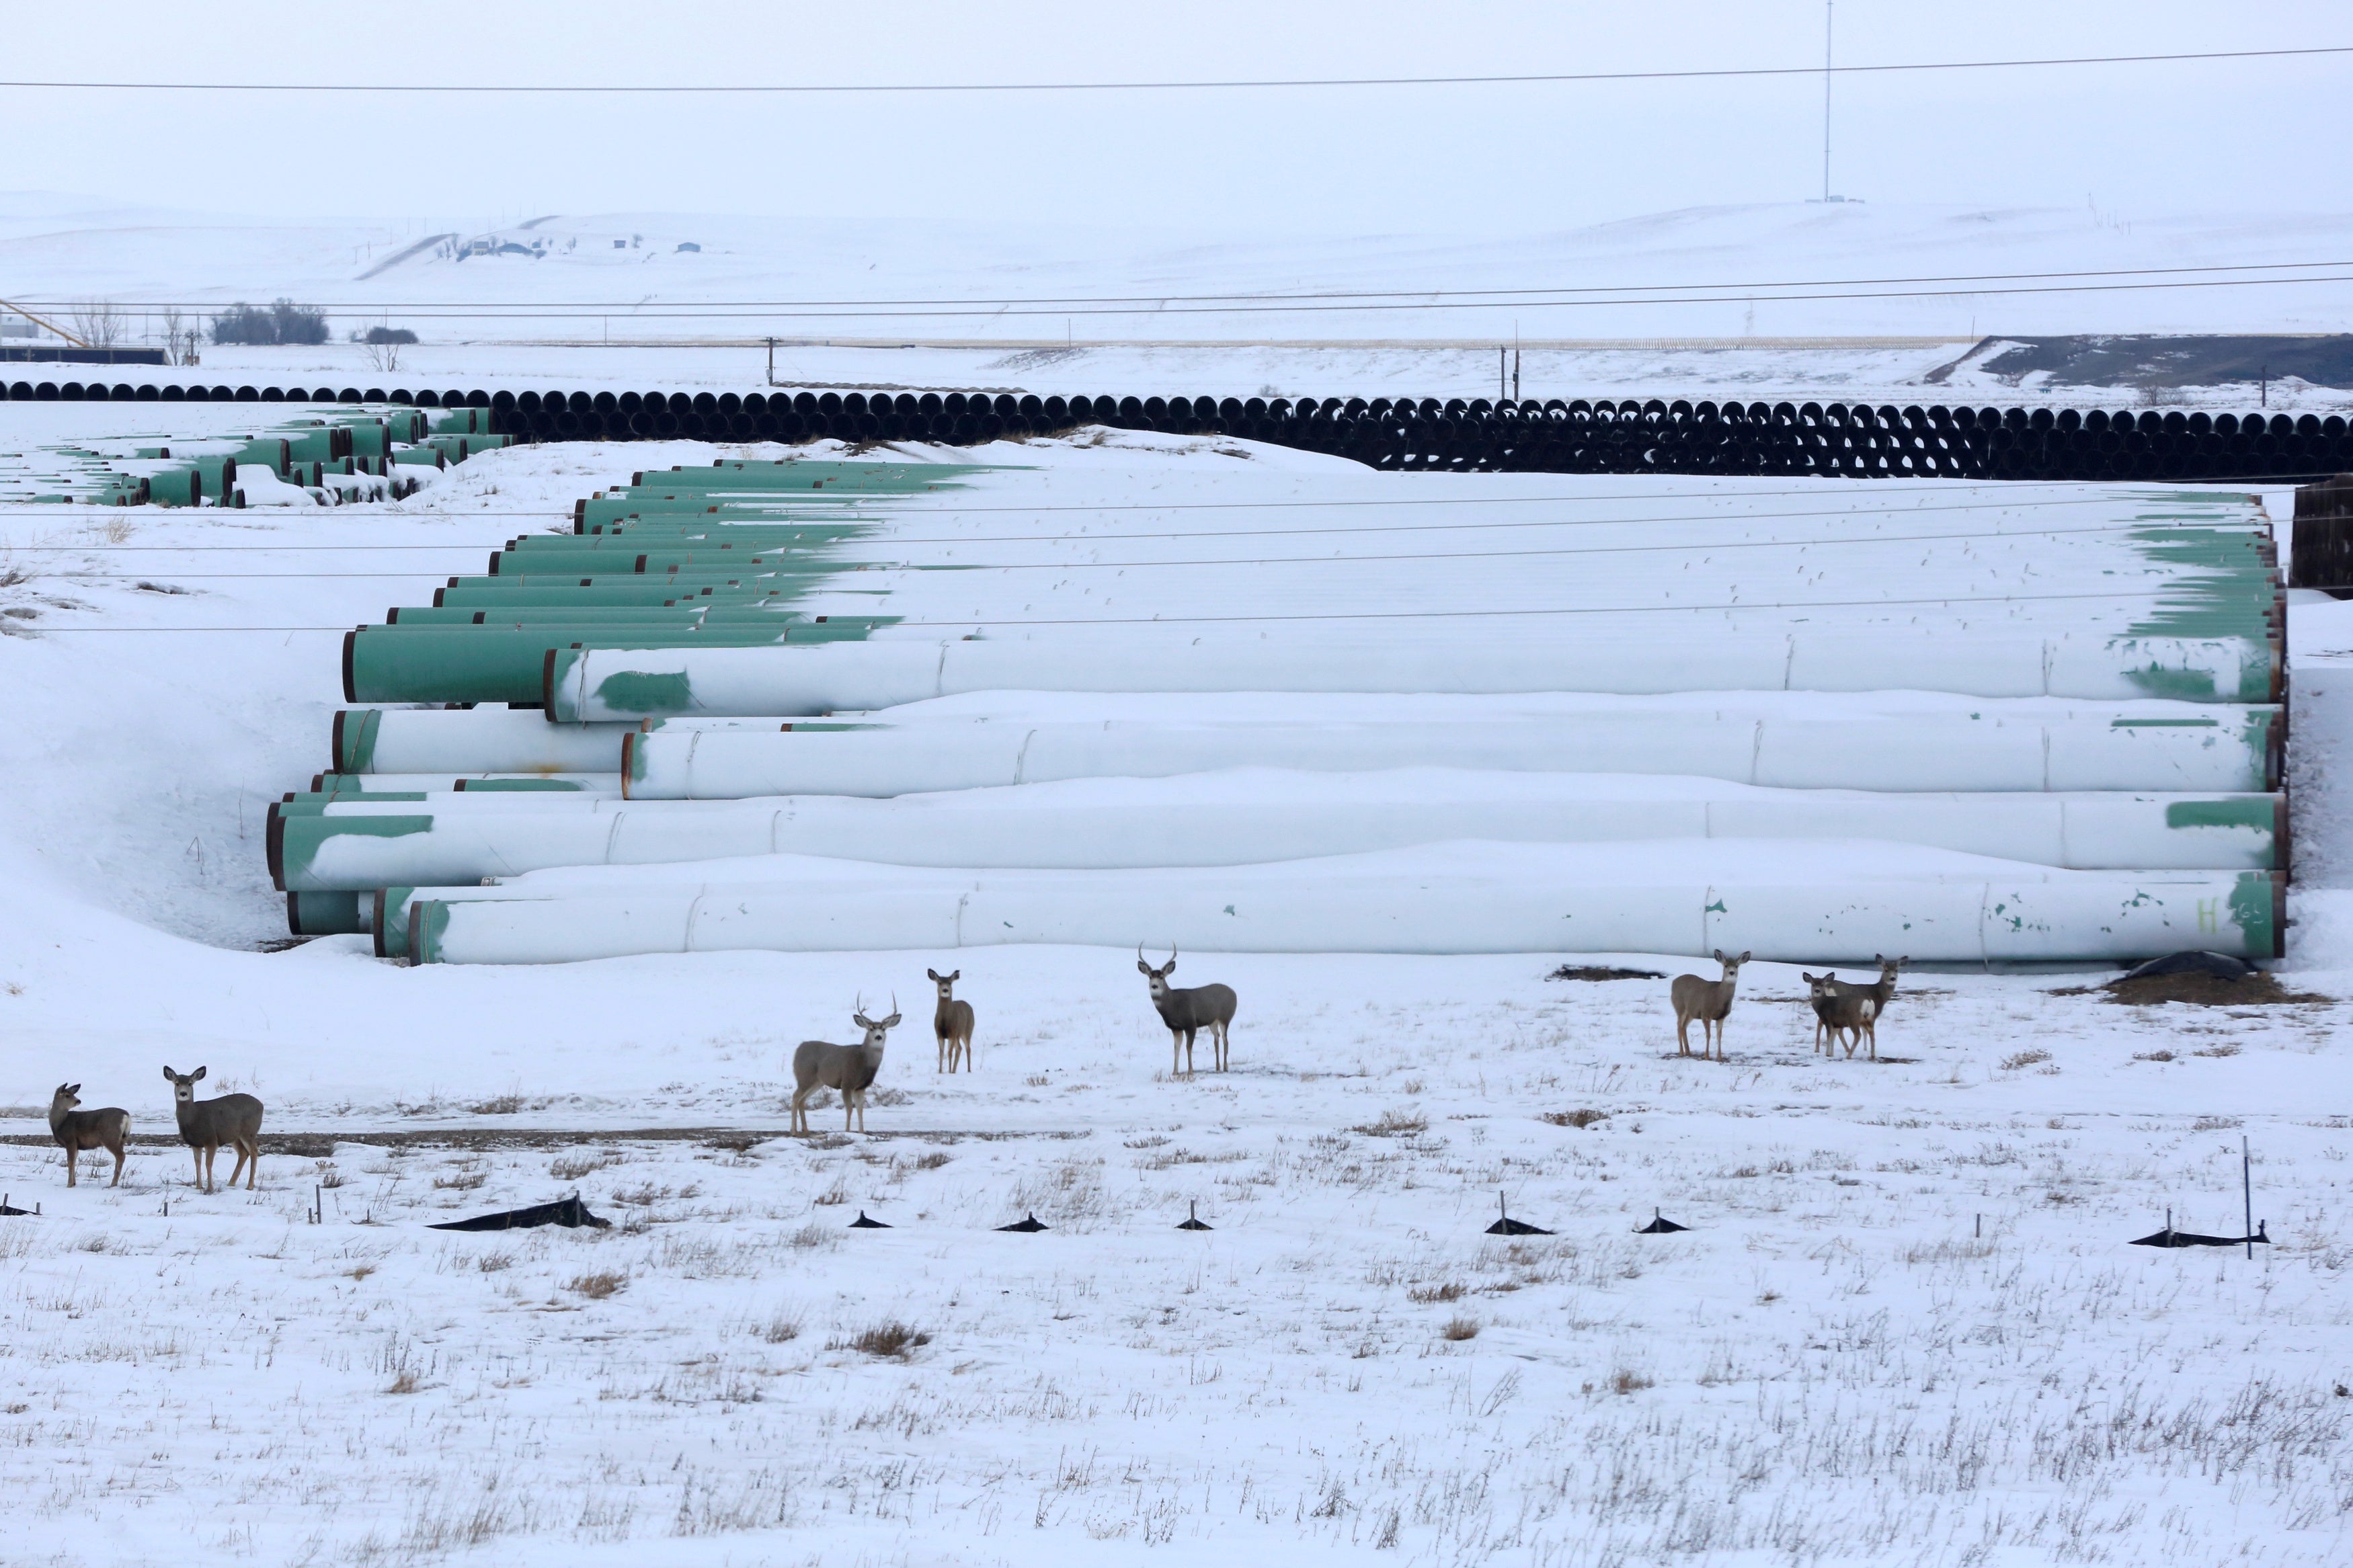 A depot used to store pipes for TC Energy Corp’s planned Keystone XL oil pipeline is seen in Gascoyne, North Dakota, January 25, 2017